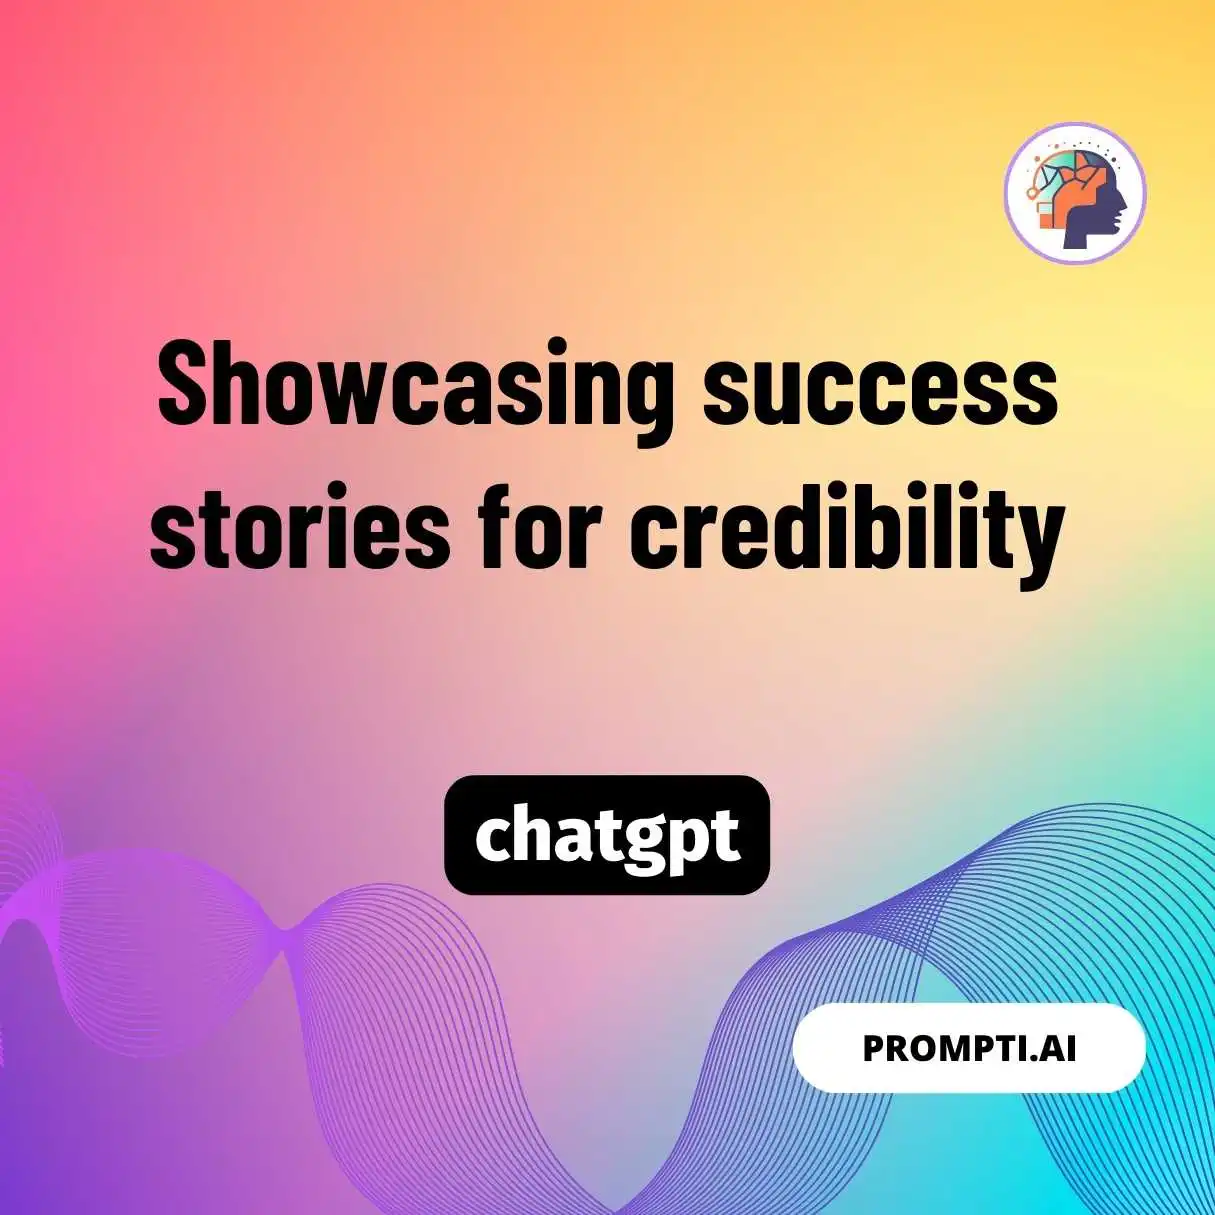 Showcasing success stories for credibility